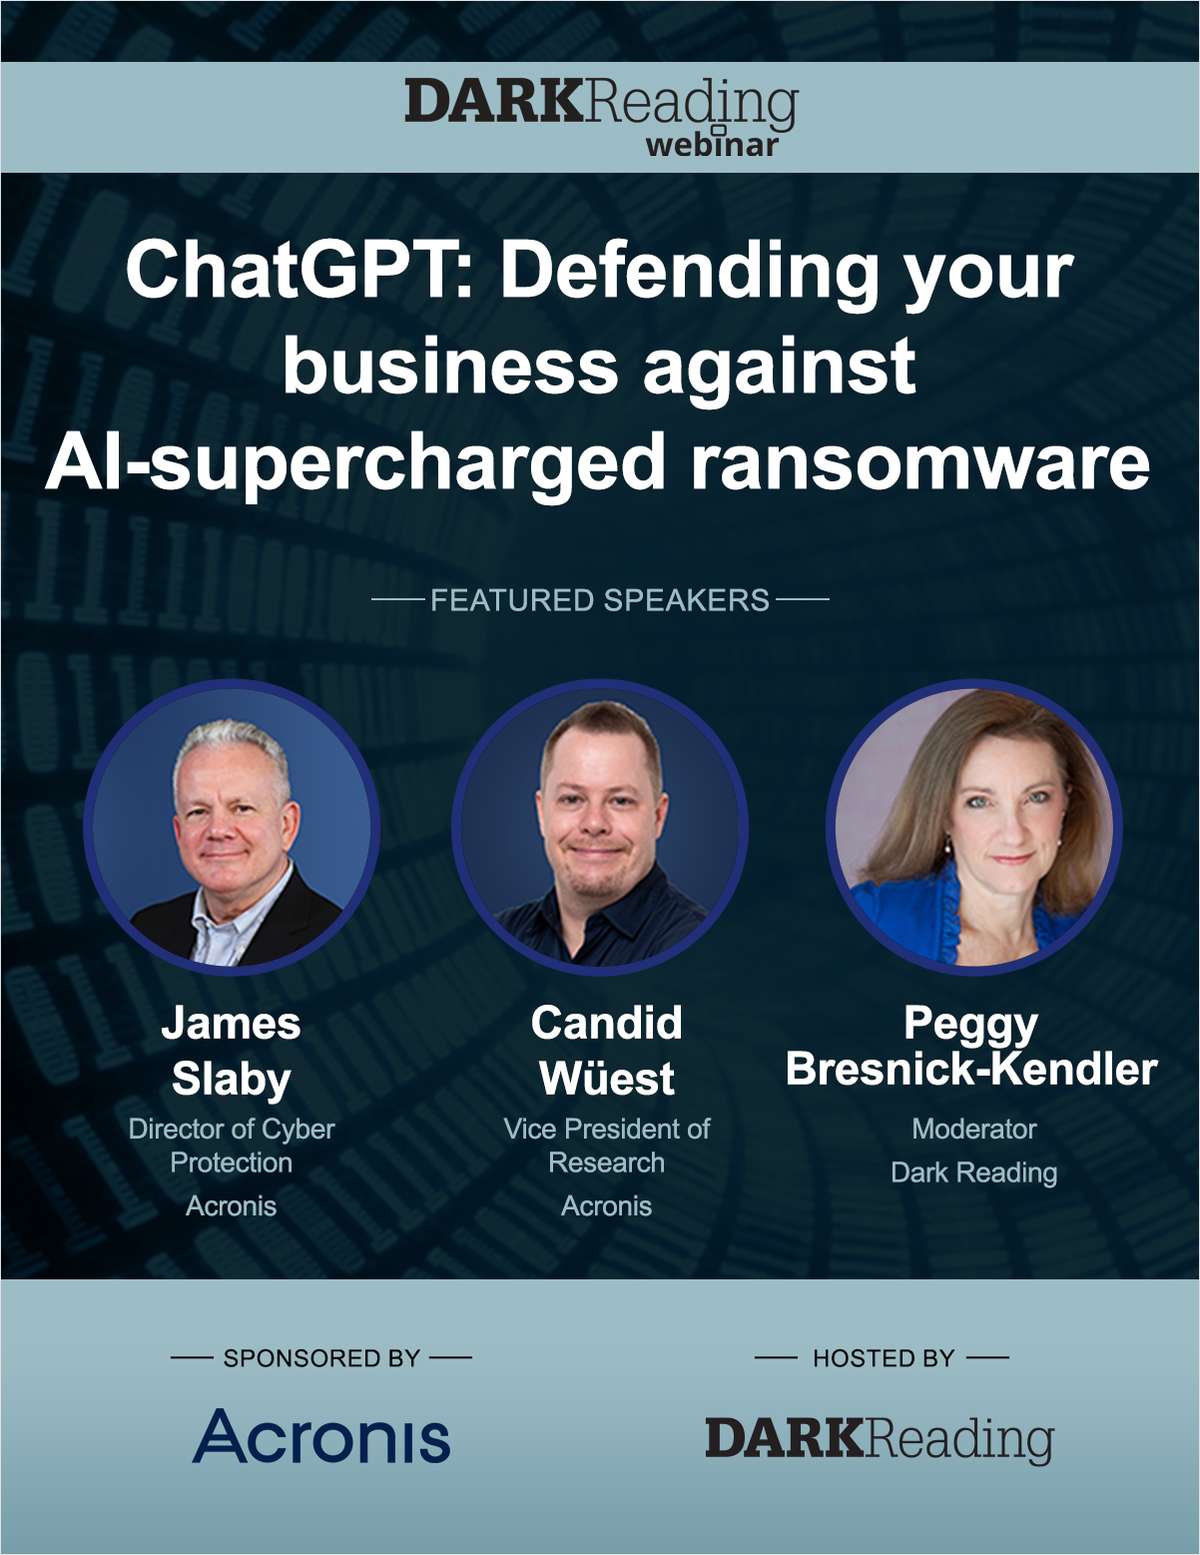 ChatGPT: Defending your business against AI-supercharged ransomware